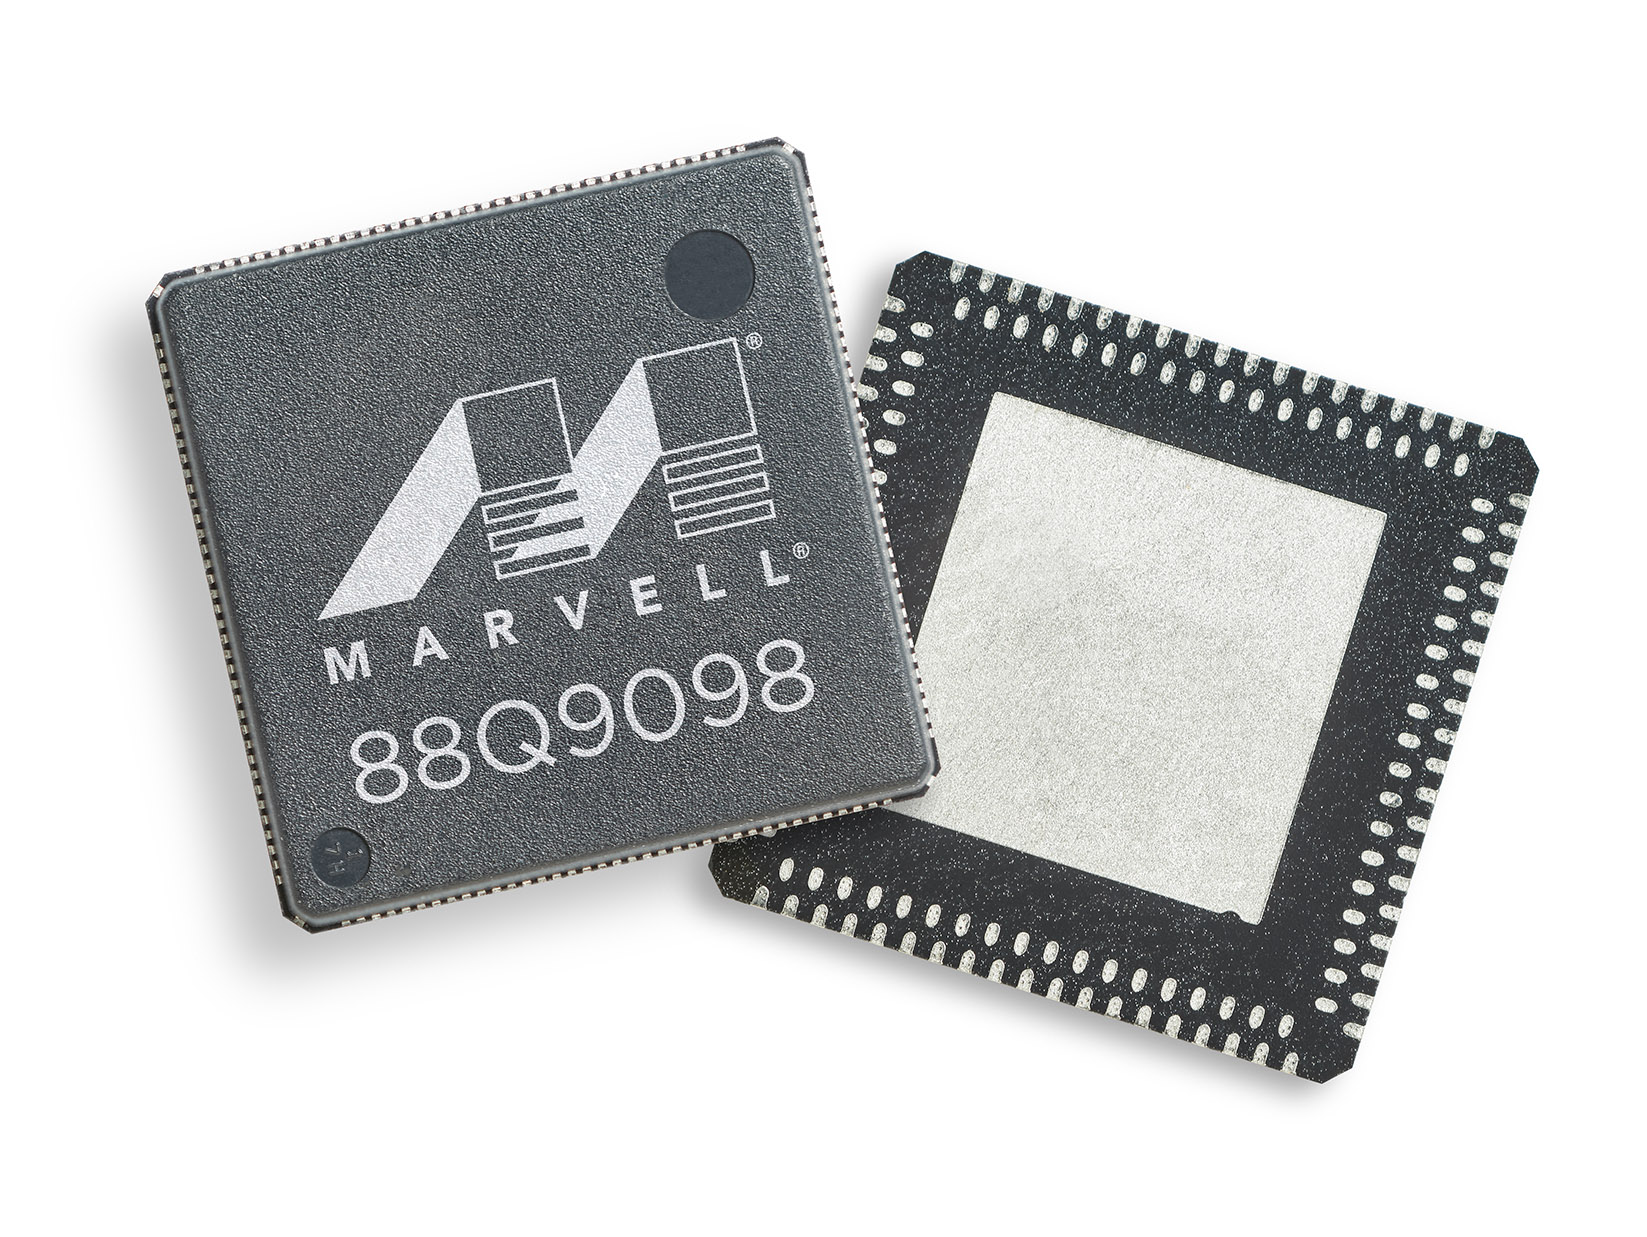 88Q9098 wireless SoC for next-generation connected vehicles